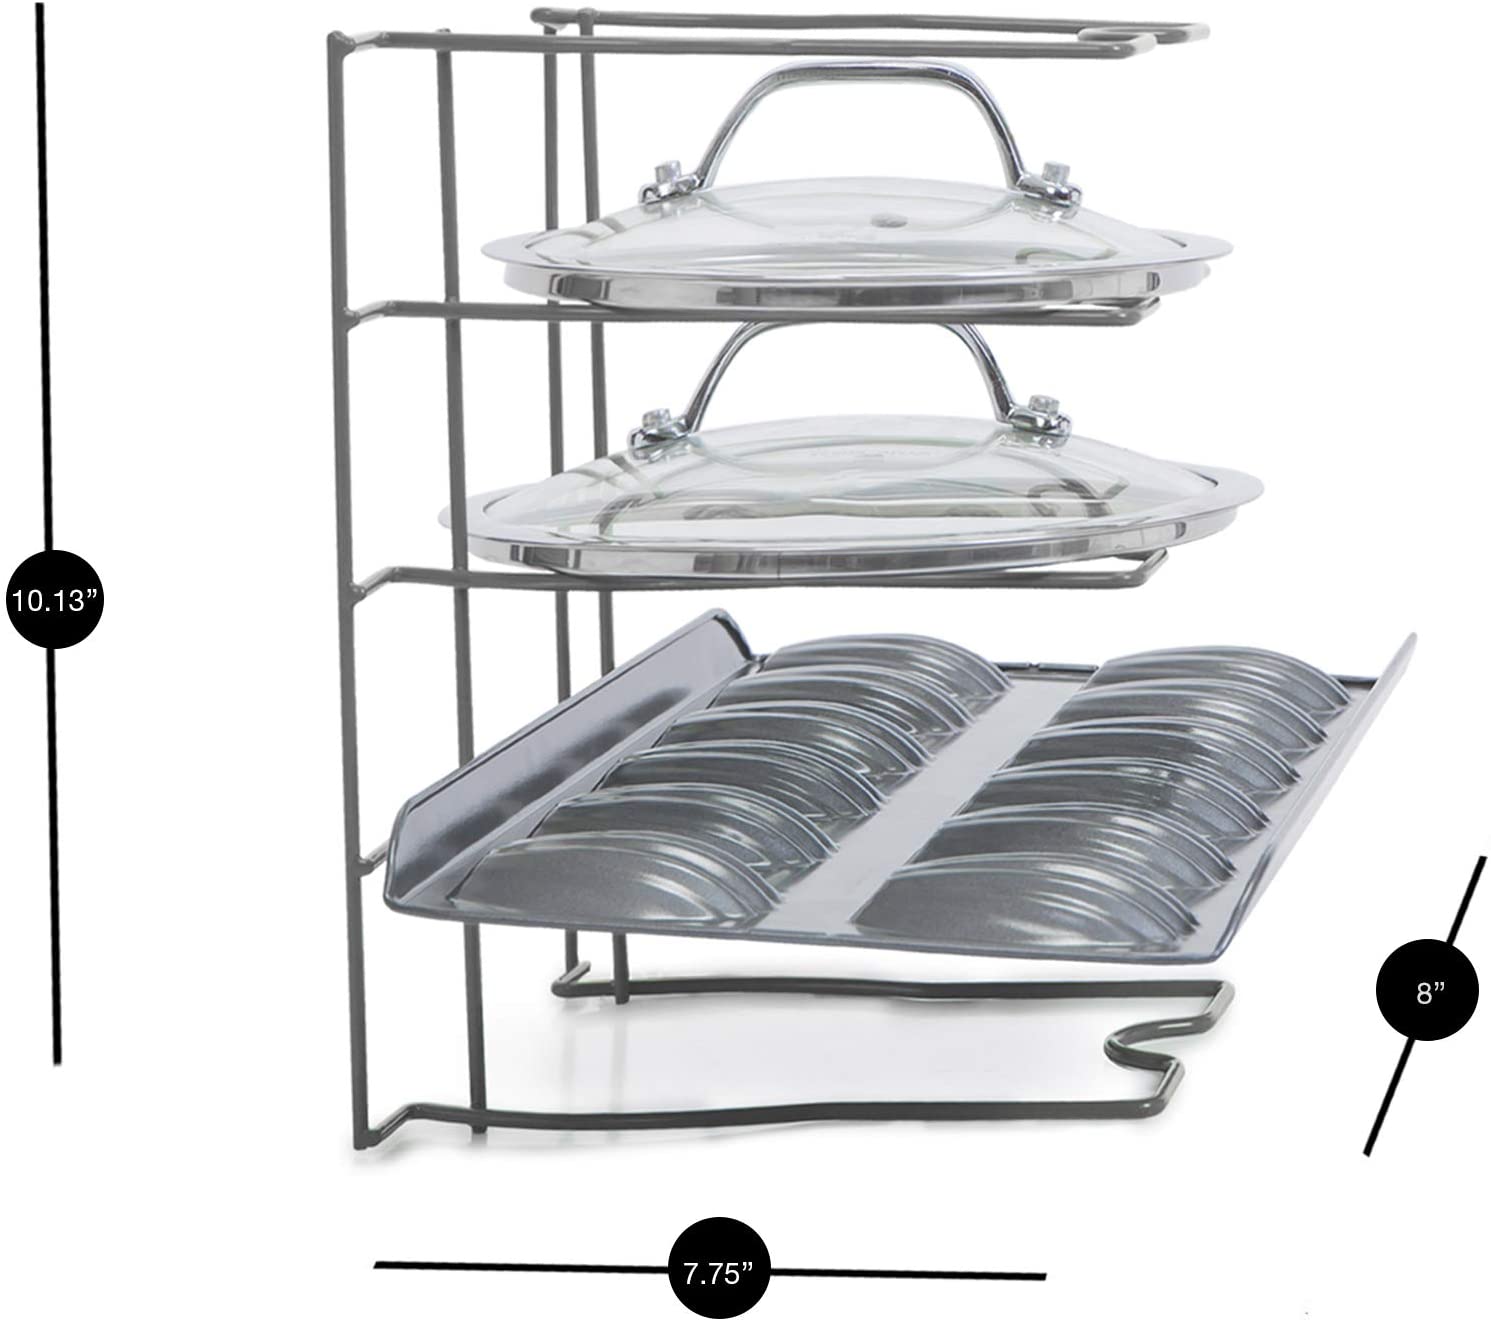 Bakeware and Lid Storage Rack with 4-Compartment Dividers - Smart Design® 17